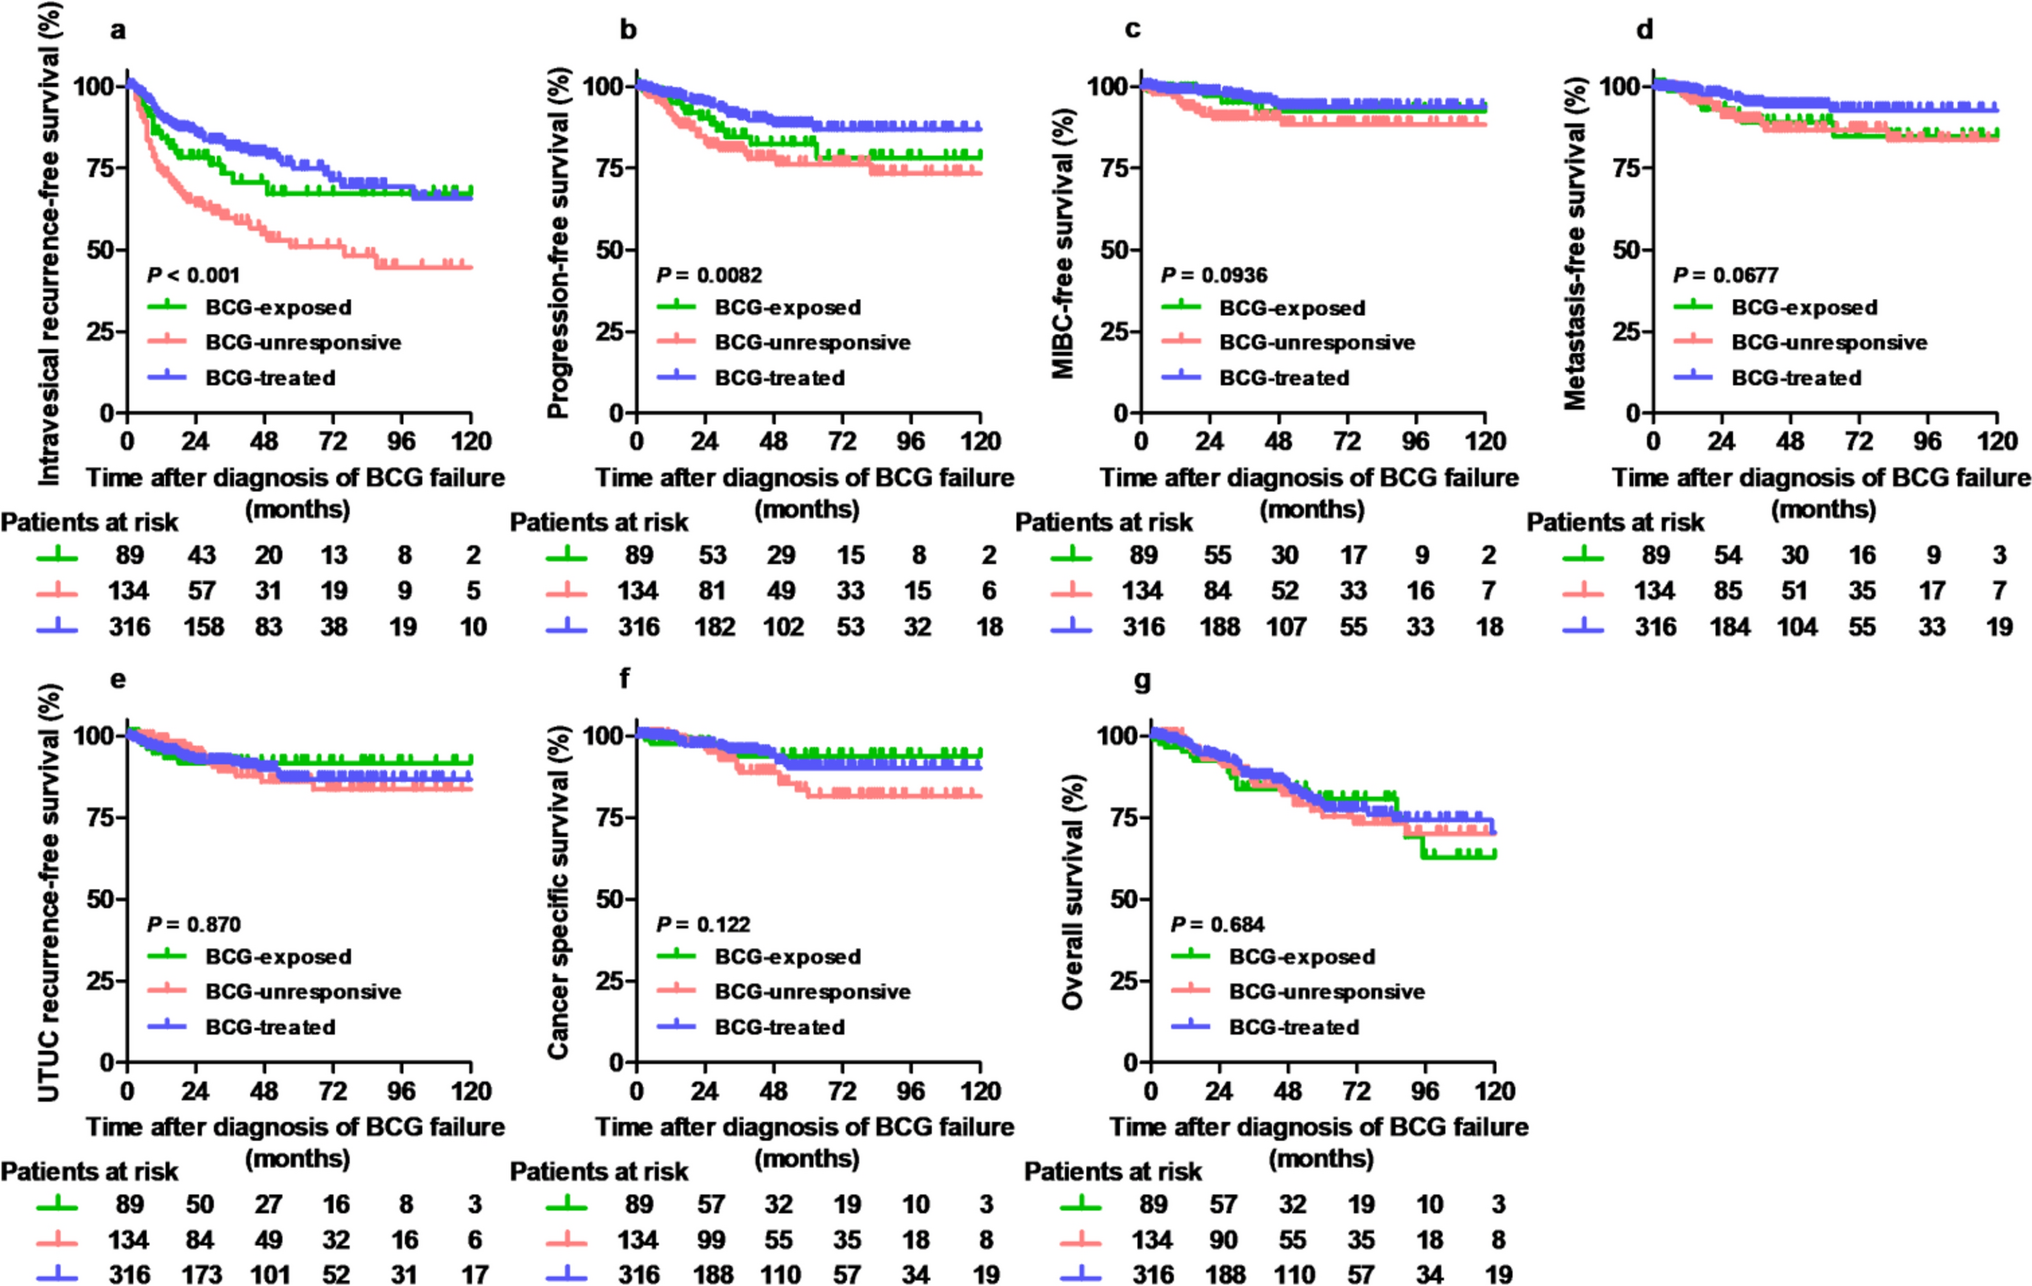 Treatment patterns and prognosis in patients with Bacillus Calmette–Guérin-exposed high-risk non-muscle invasive bladder cancer: a real-world data analysis